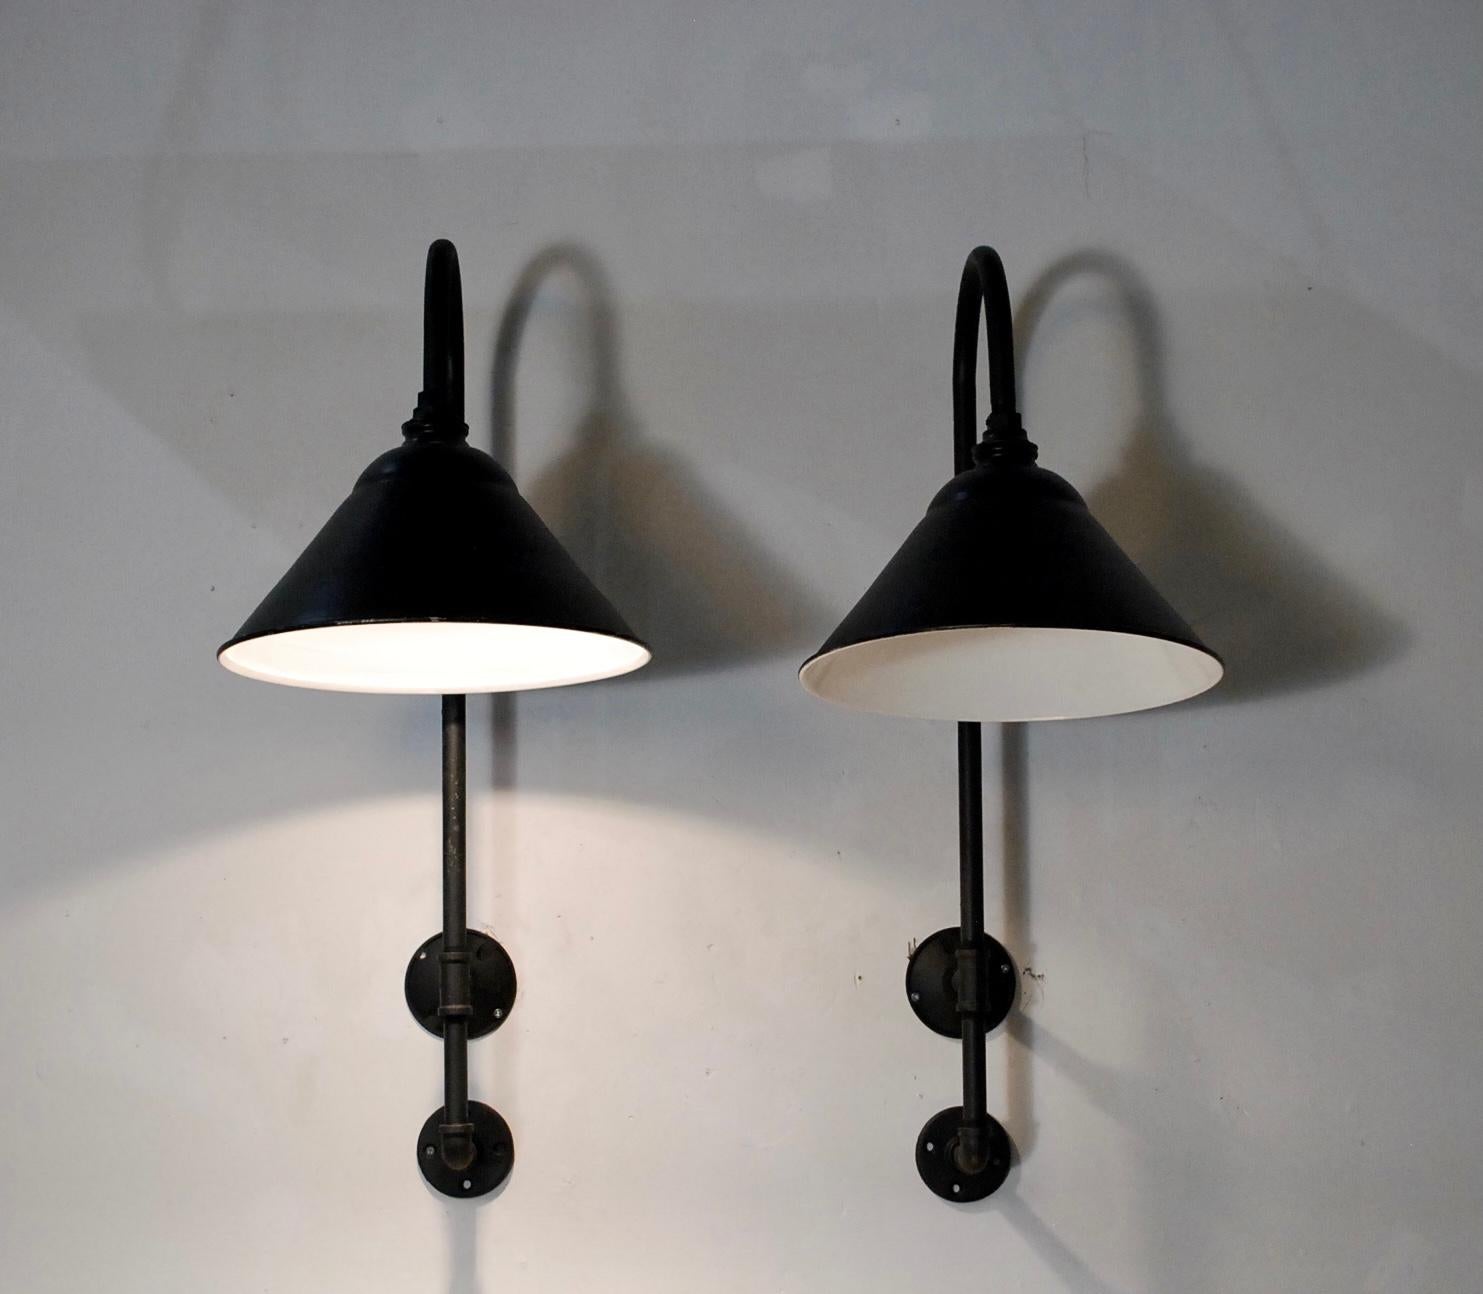 We have a set of 4 of these black enamel sconces mounted on pipe, made by Benjamin electric co., rewired tested and CSA certified.
Ready to go. Indoor or outdoor covered area.

Price per light.